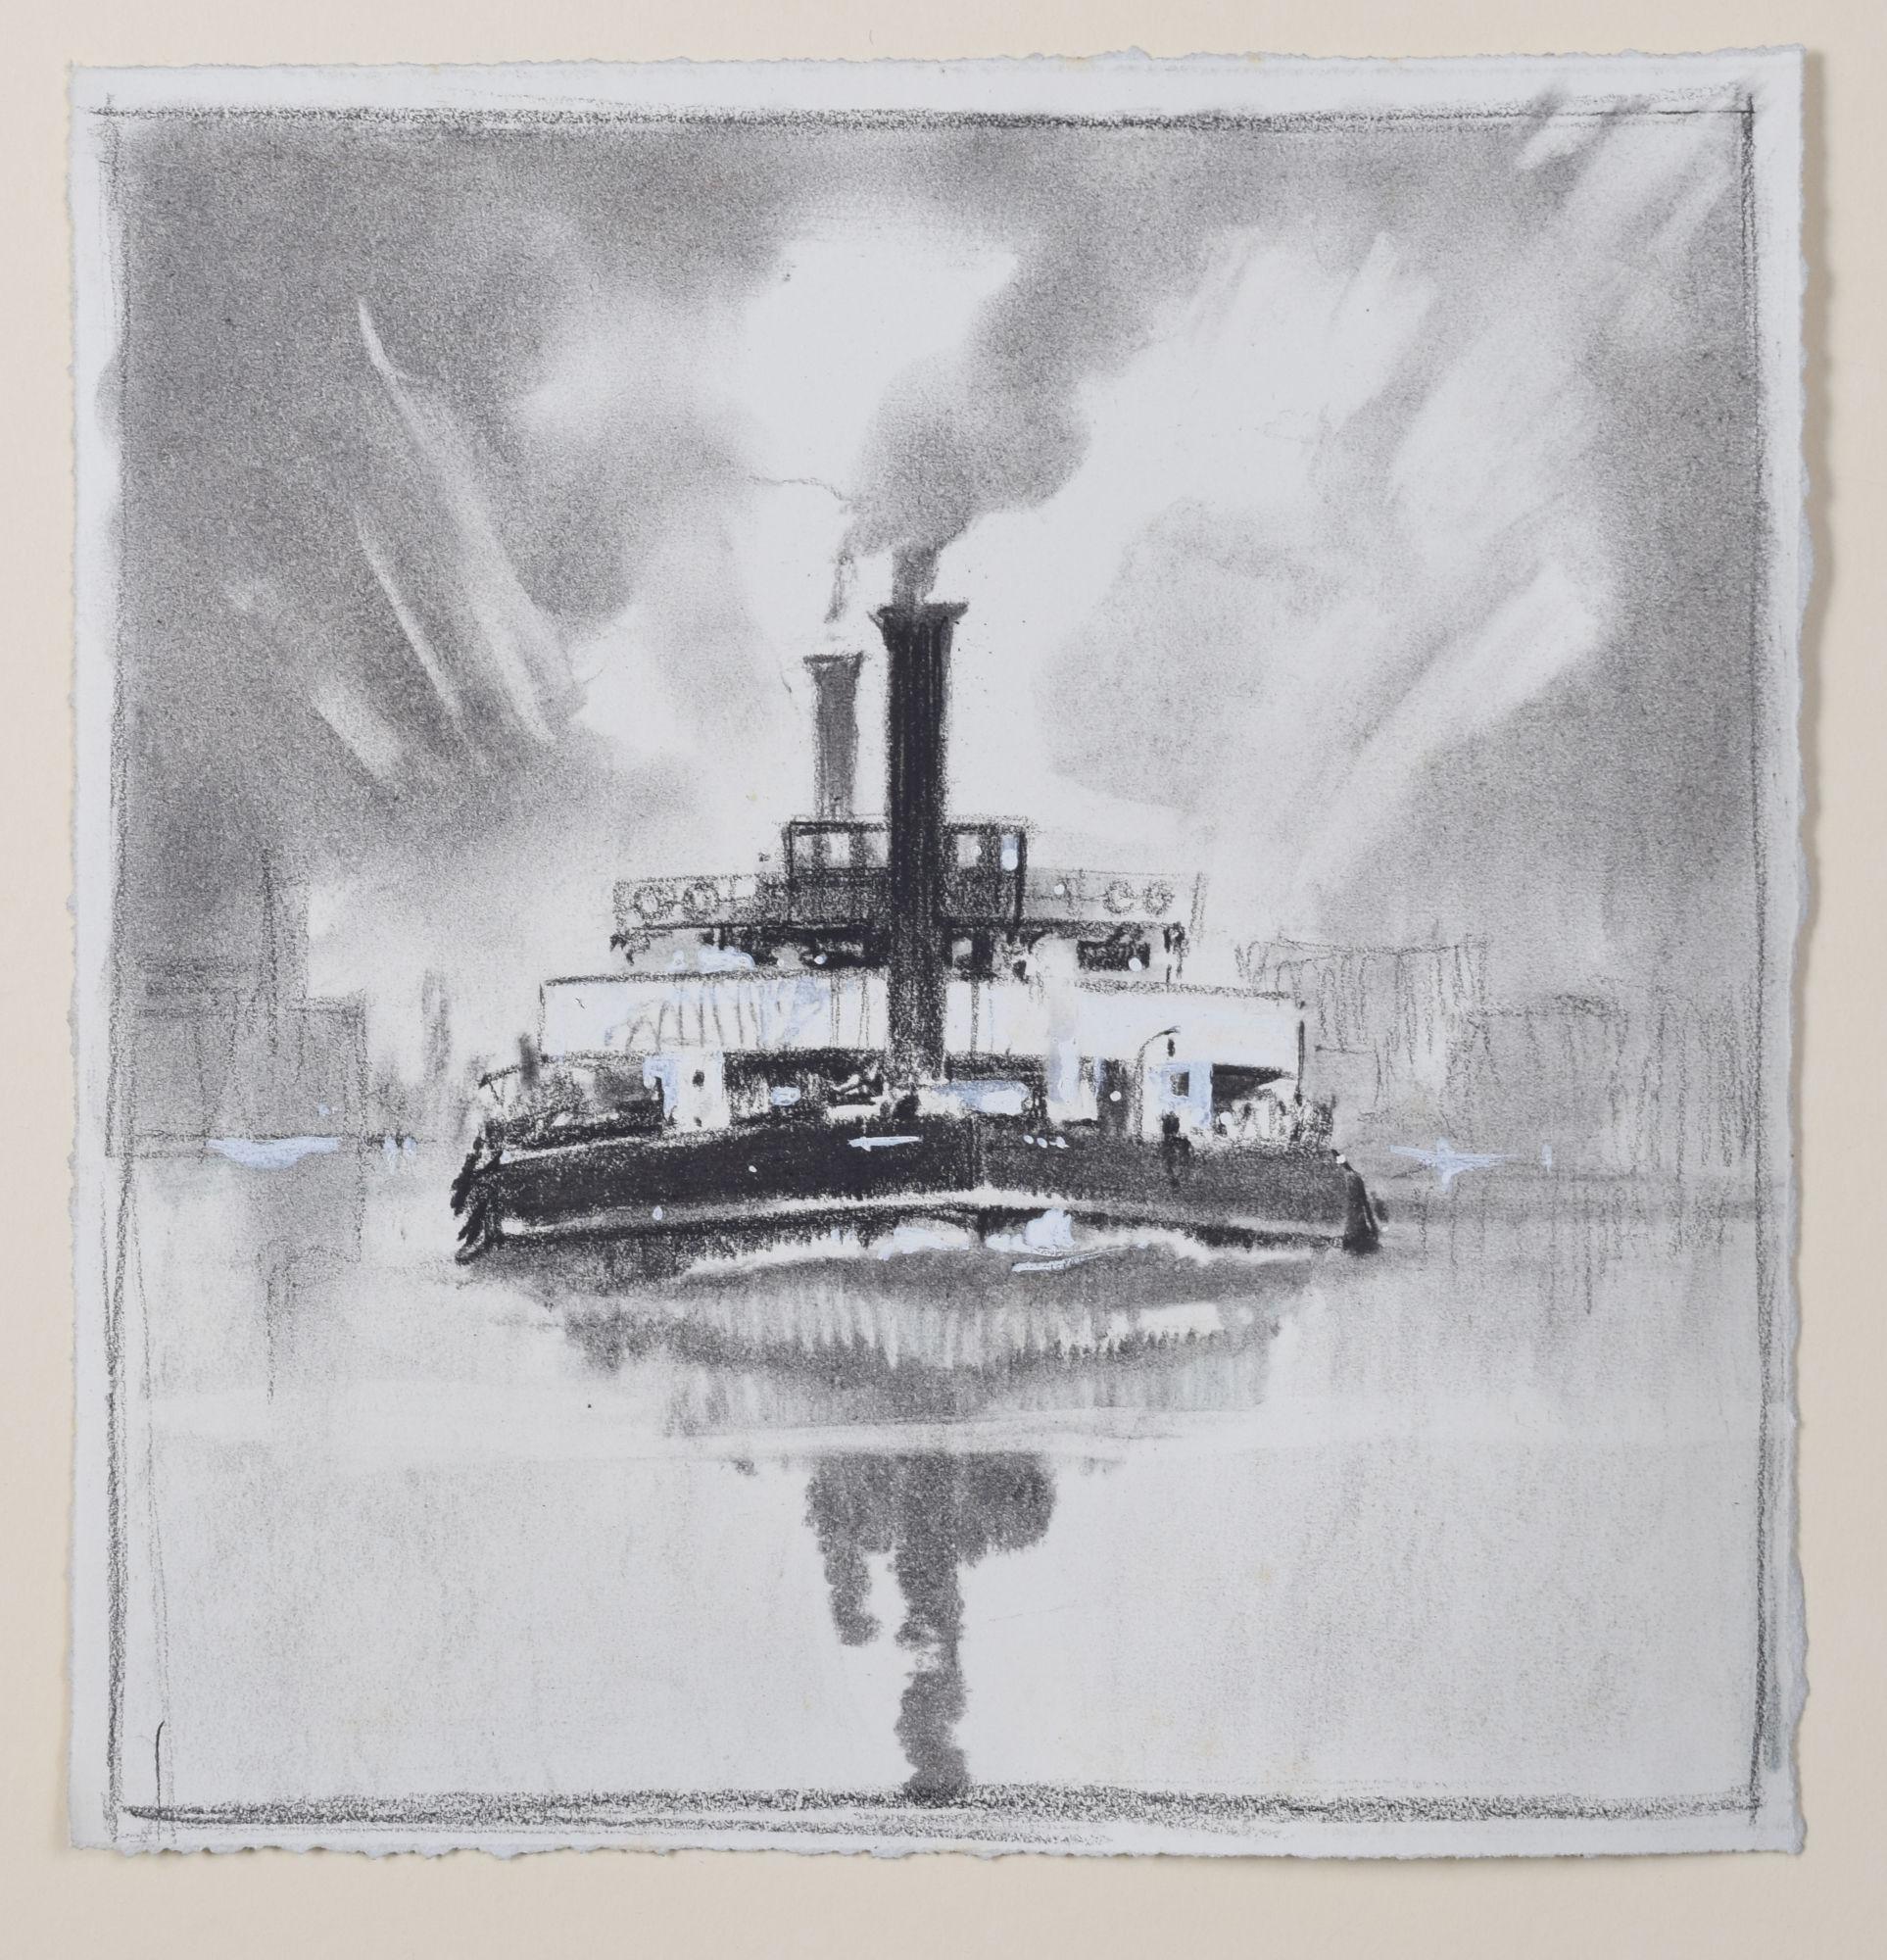 To see more, scroll down to "More from this Seller" and below it click on "See all from this Seller." 

Leslie Carr (1891 - 1969)
Paddlesteamer
Mixed media with pencil bodycolour
19 x 18 cm

From one of Carr's sketchbooks.

A steamship rendered in